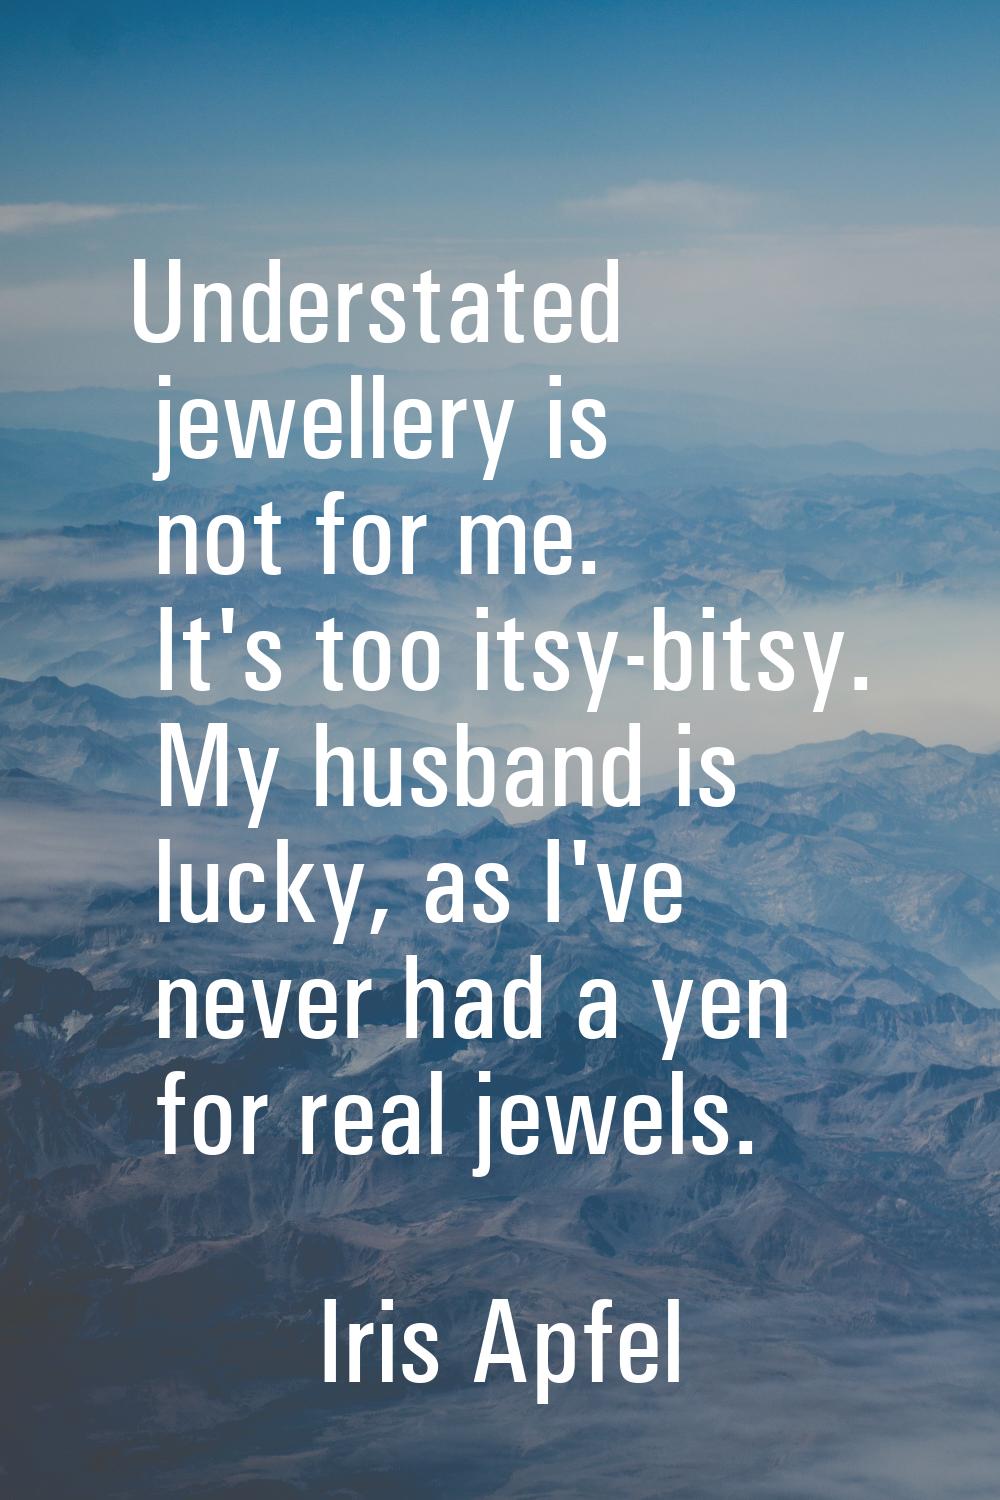 Understated jewellery is not for me. It's too itsy-bitsy. My husband is lucky, as I've never had a 